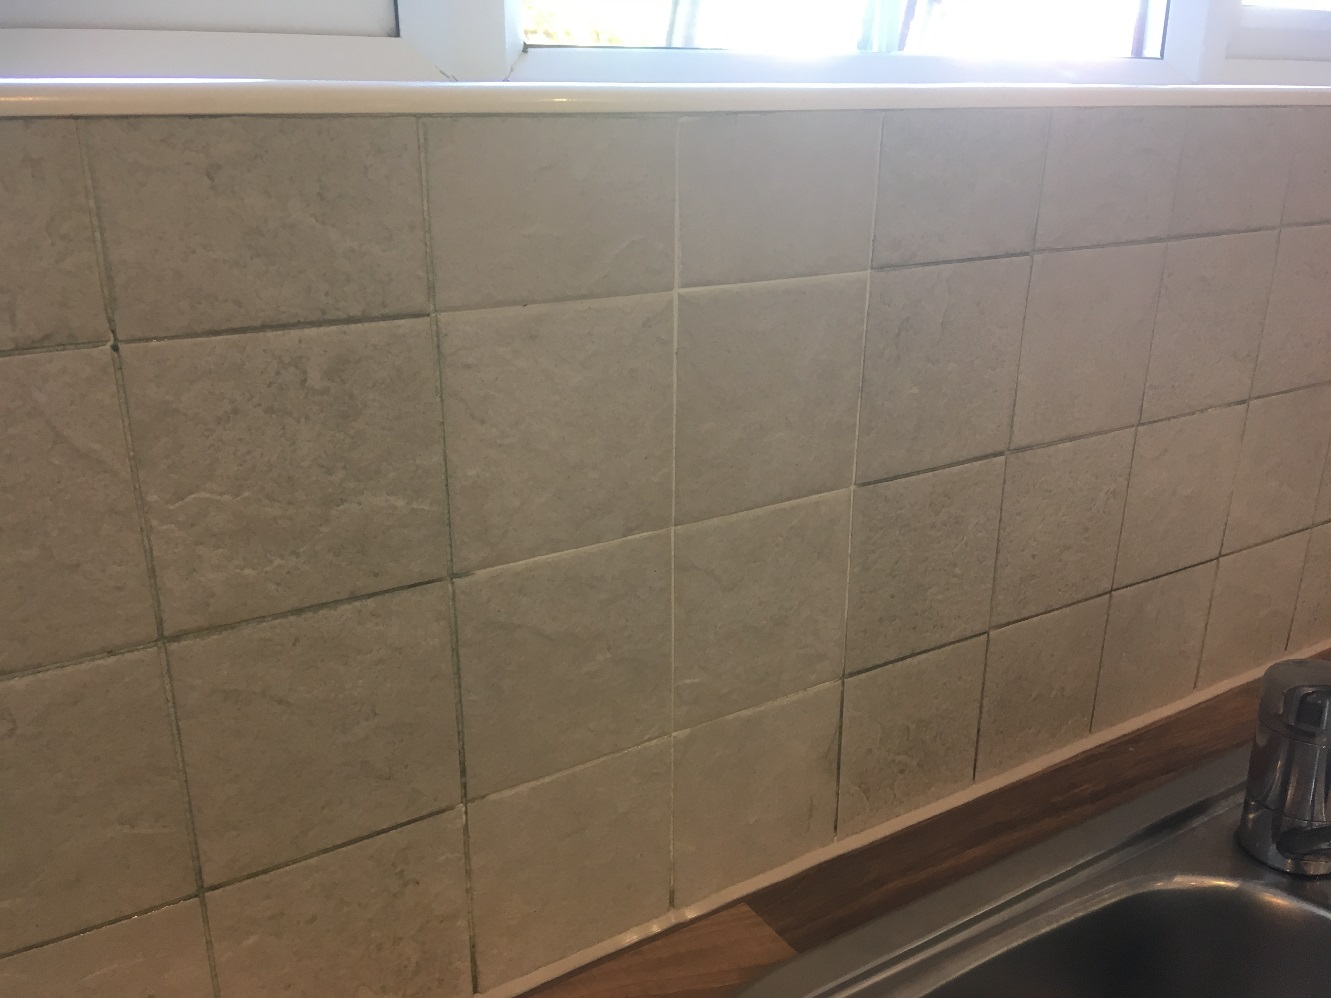 Ceramic Wall Tile Grout During Test Clean Chorley